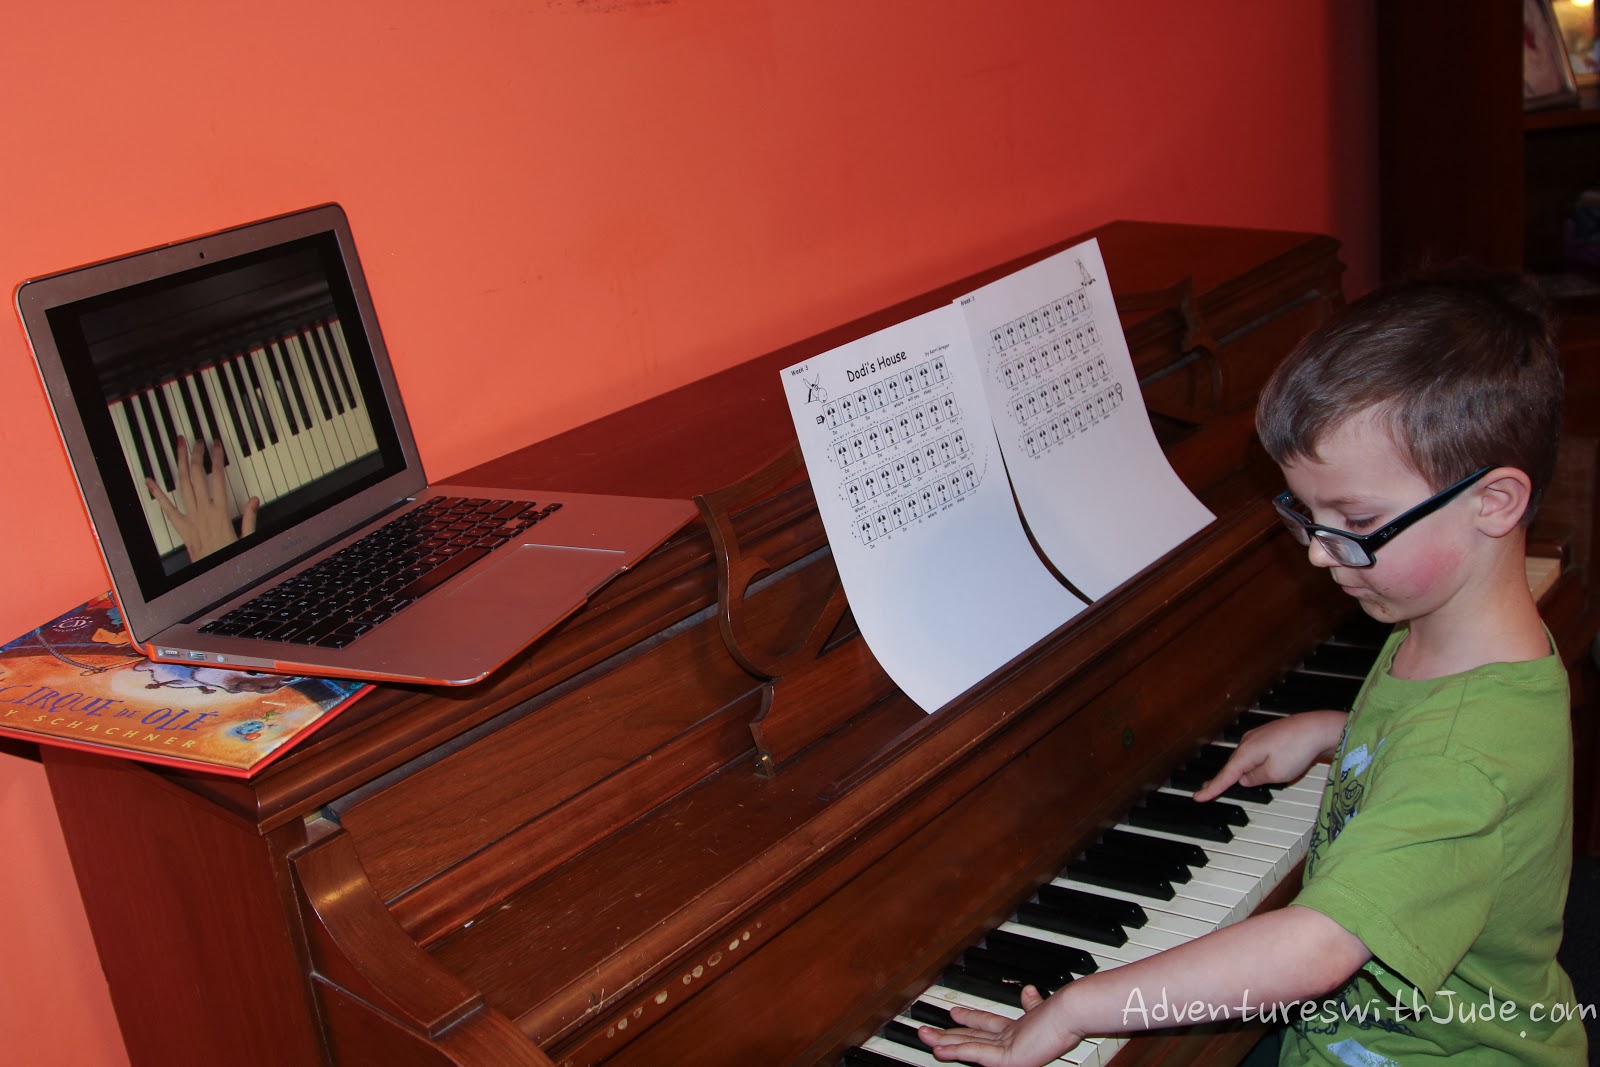 learning to play the piano that has been in the family for four generations